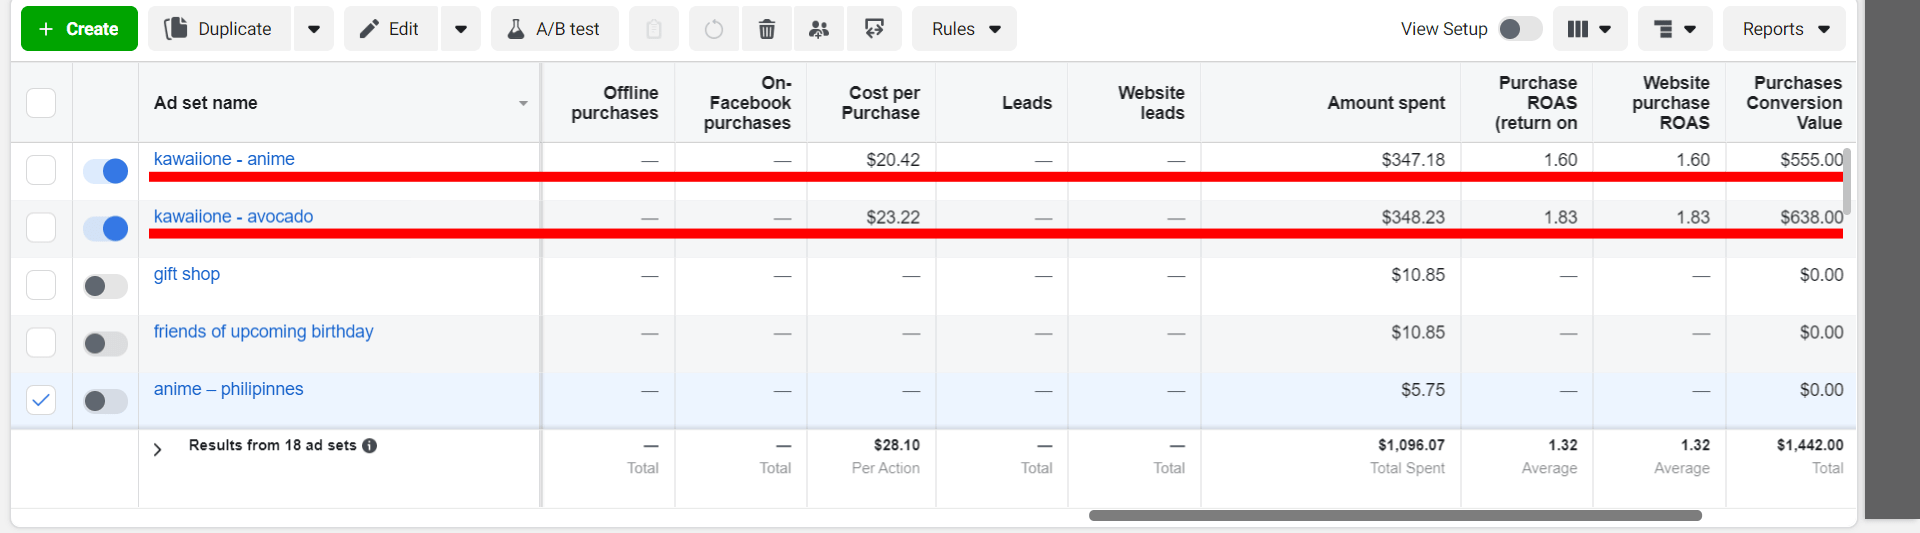 Performance of Facebook ads testing different audiences